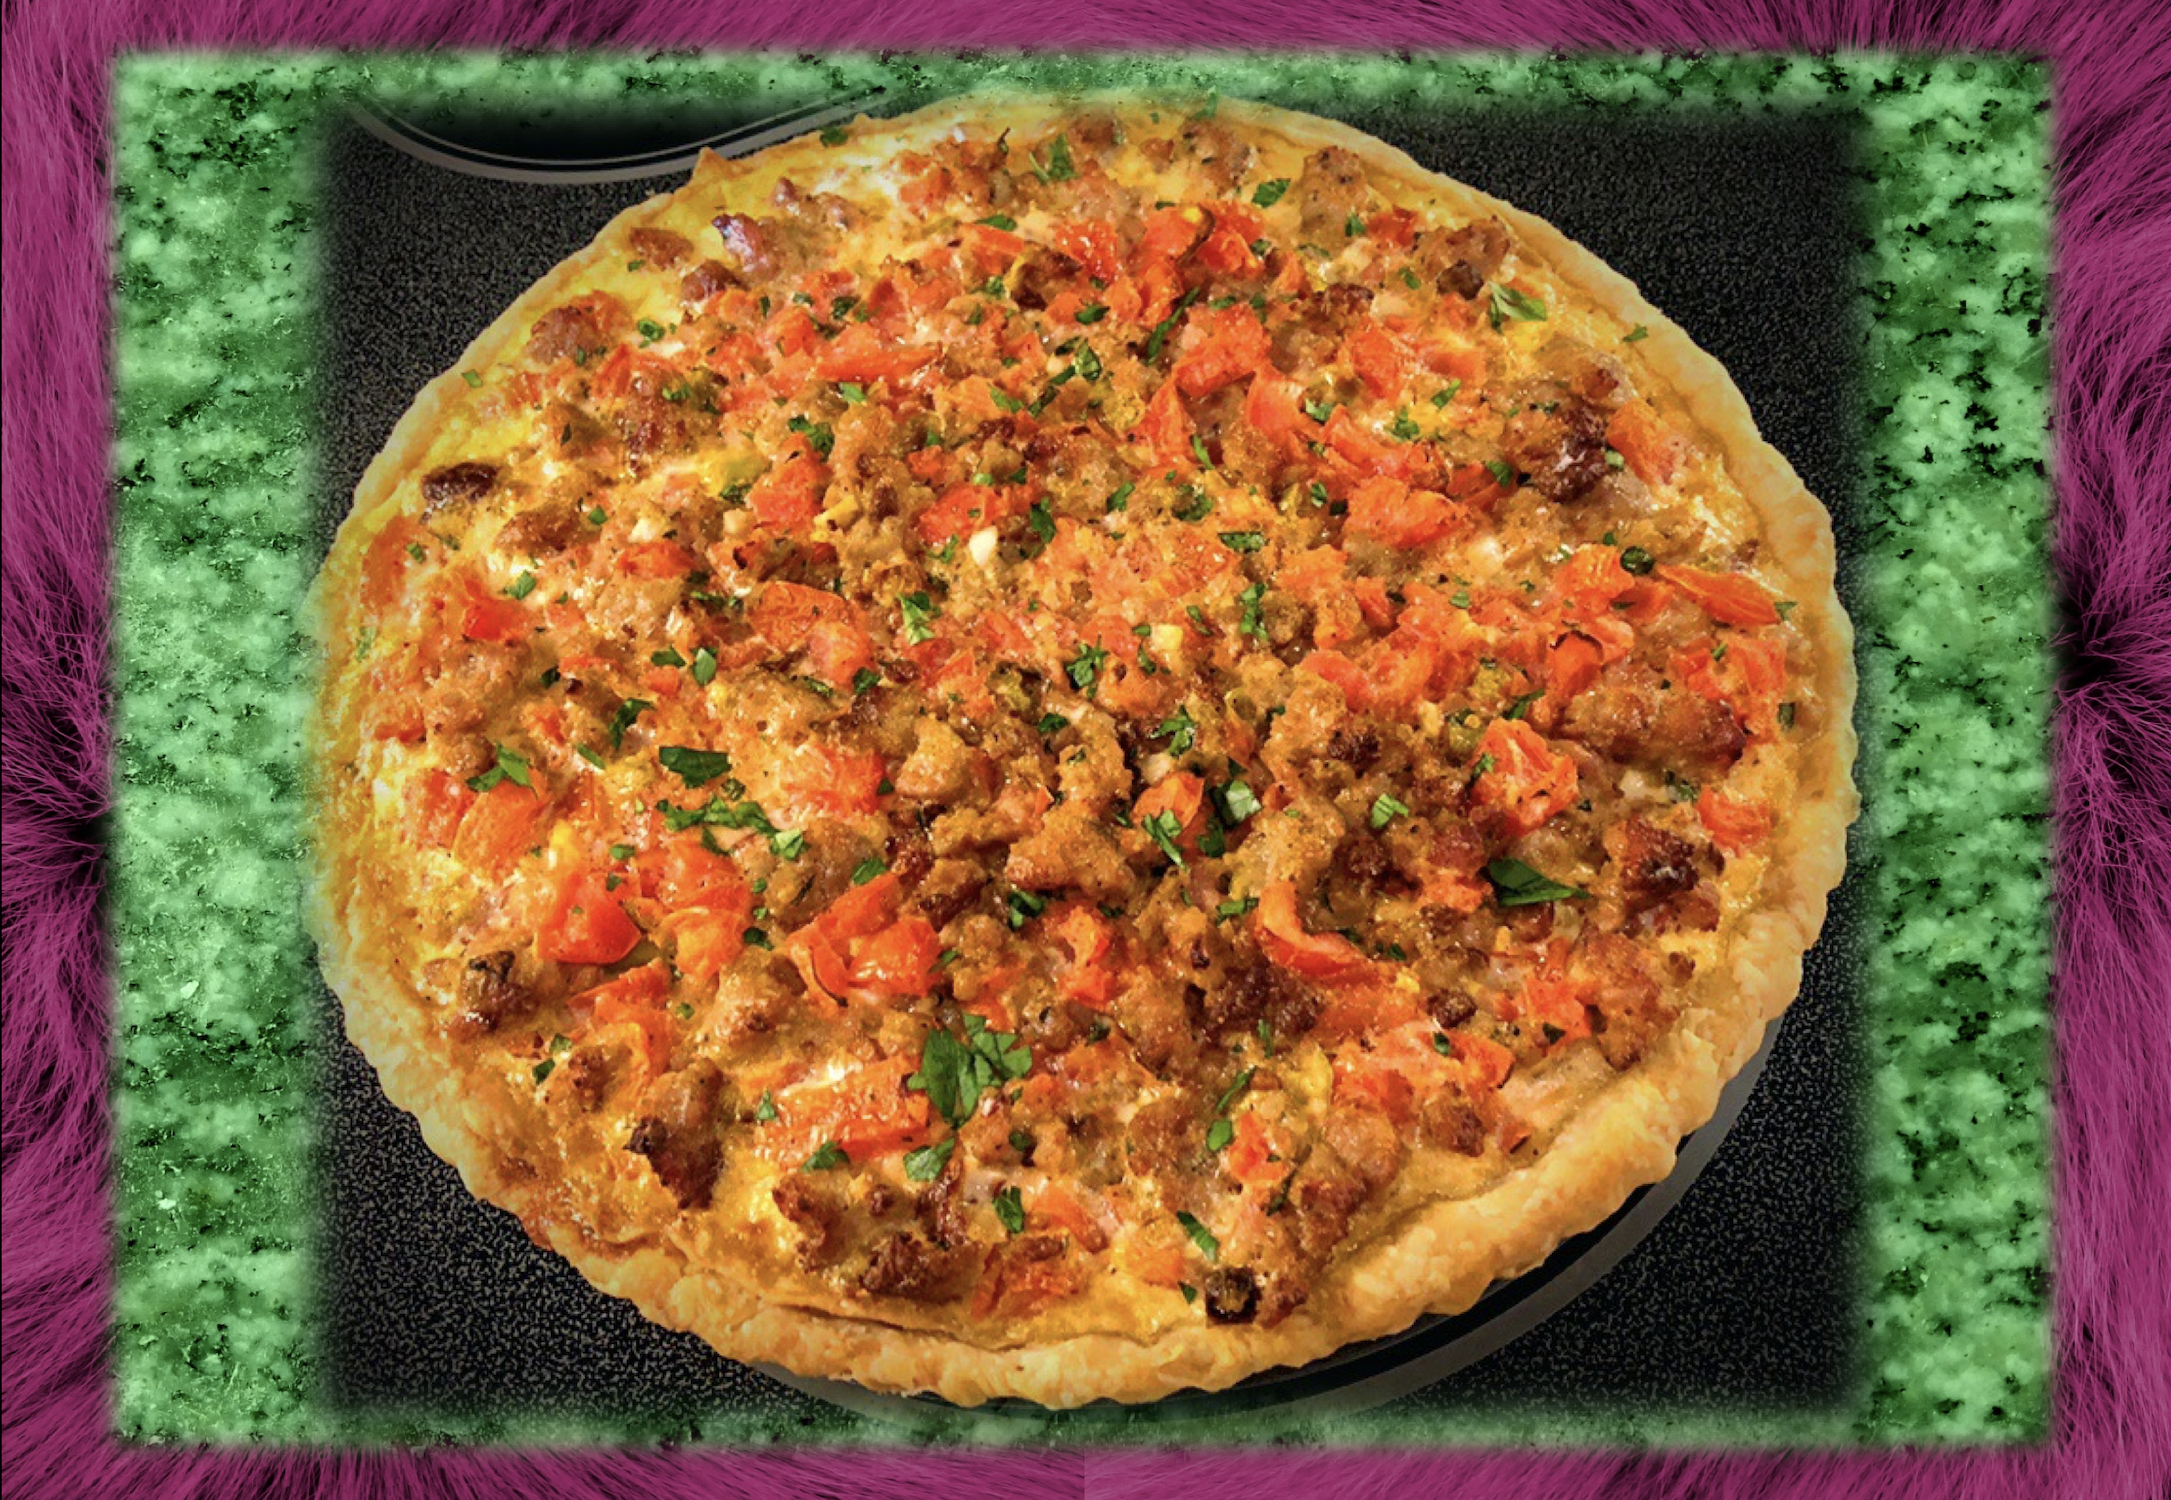 hatch Chile savory sausage and cheese tart